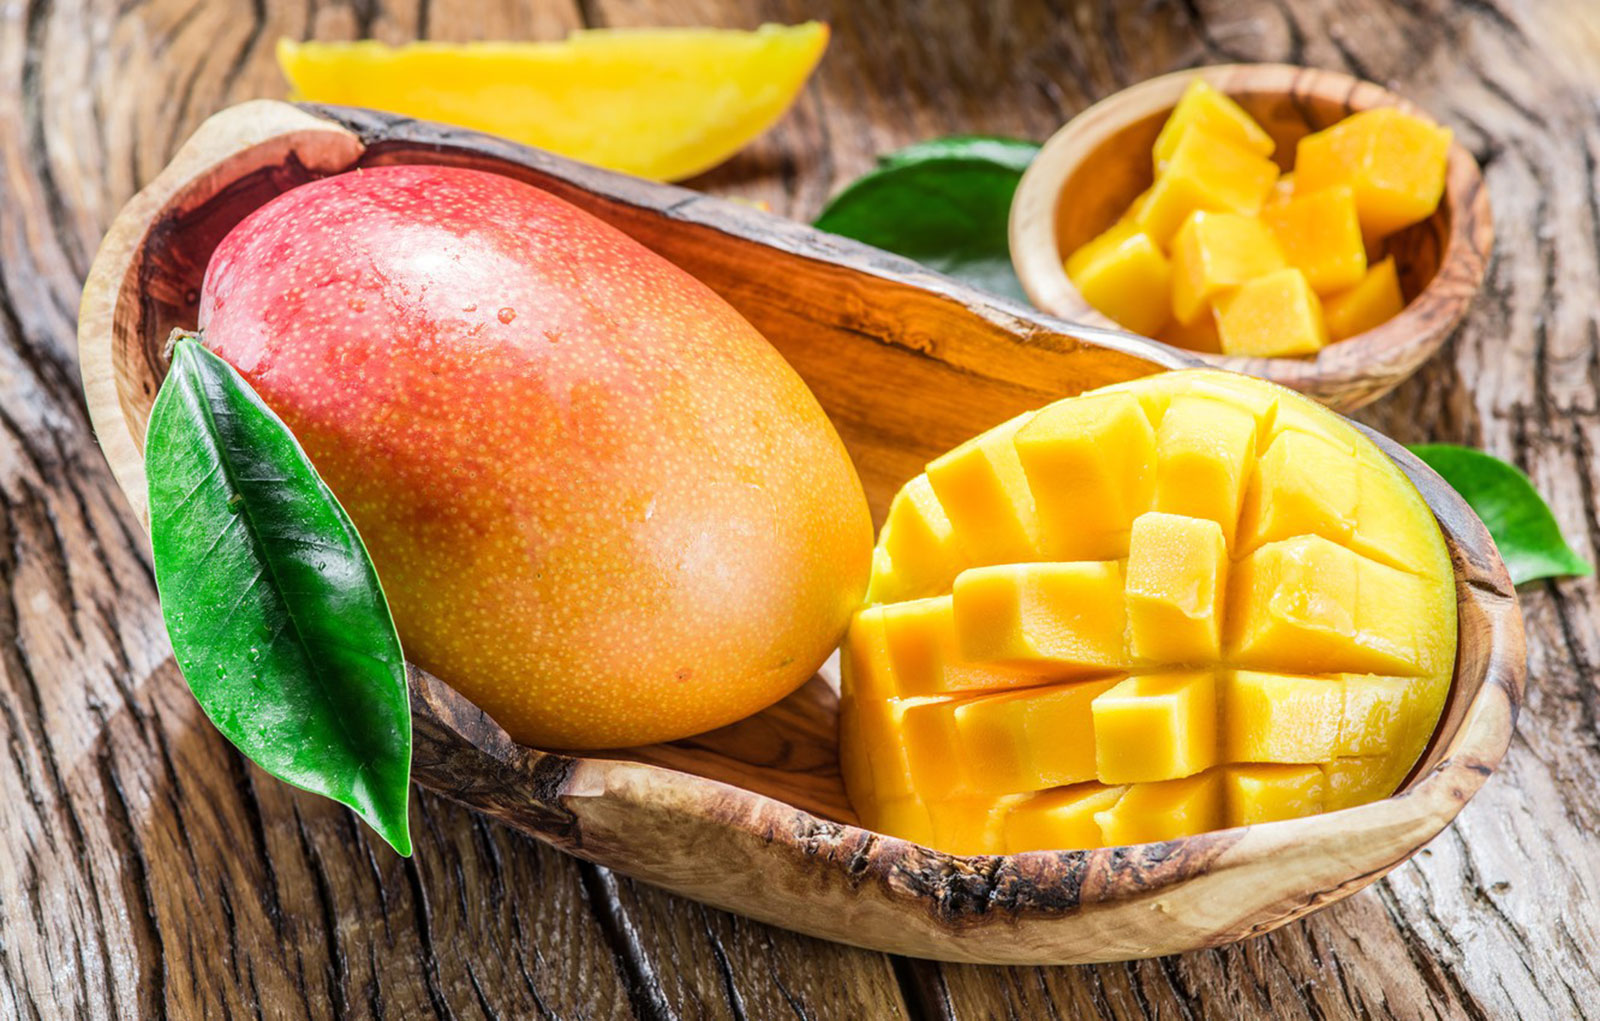 🍓 Sorry, But If You Can’t Pass This Plural Word Test, You Can Never Have Fruits Again Mango